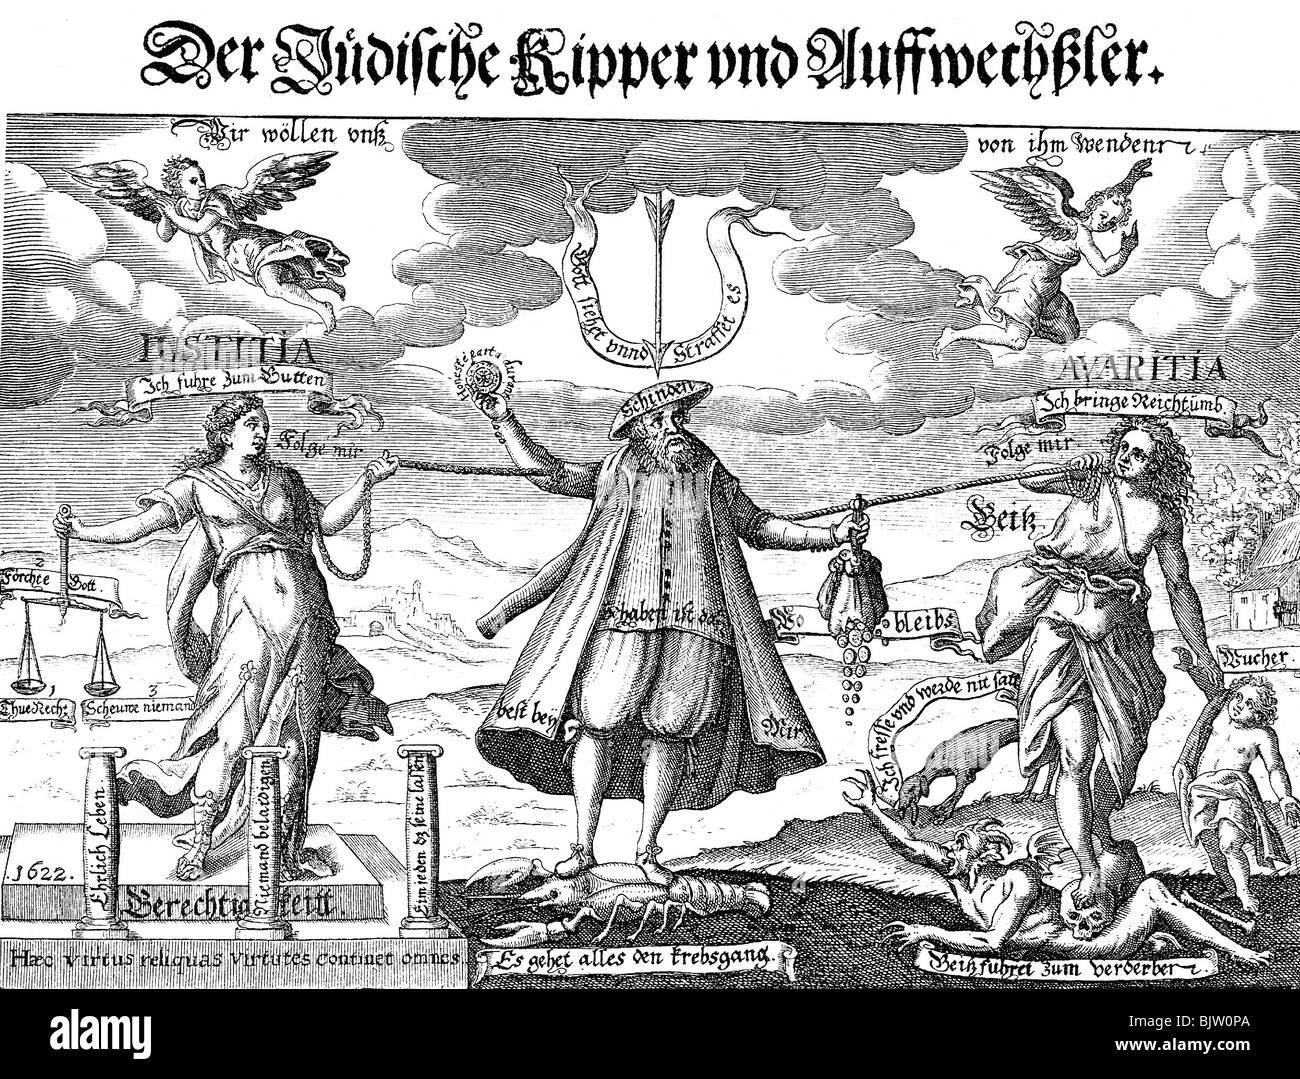 Judaism / Jewry and persecution of Jews, caricature about fraud  during exchange of money, 'Der juedische Kipper and Aufwechsler', copper engraving, 1622, Stock Photo